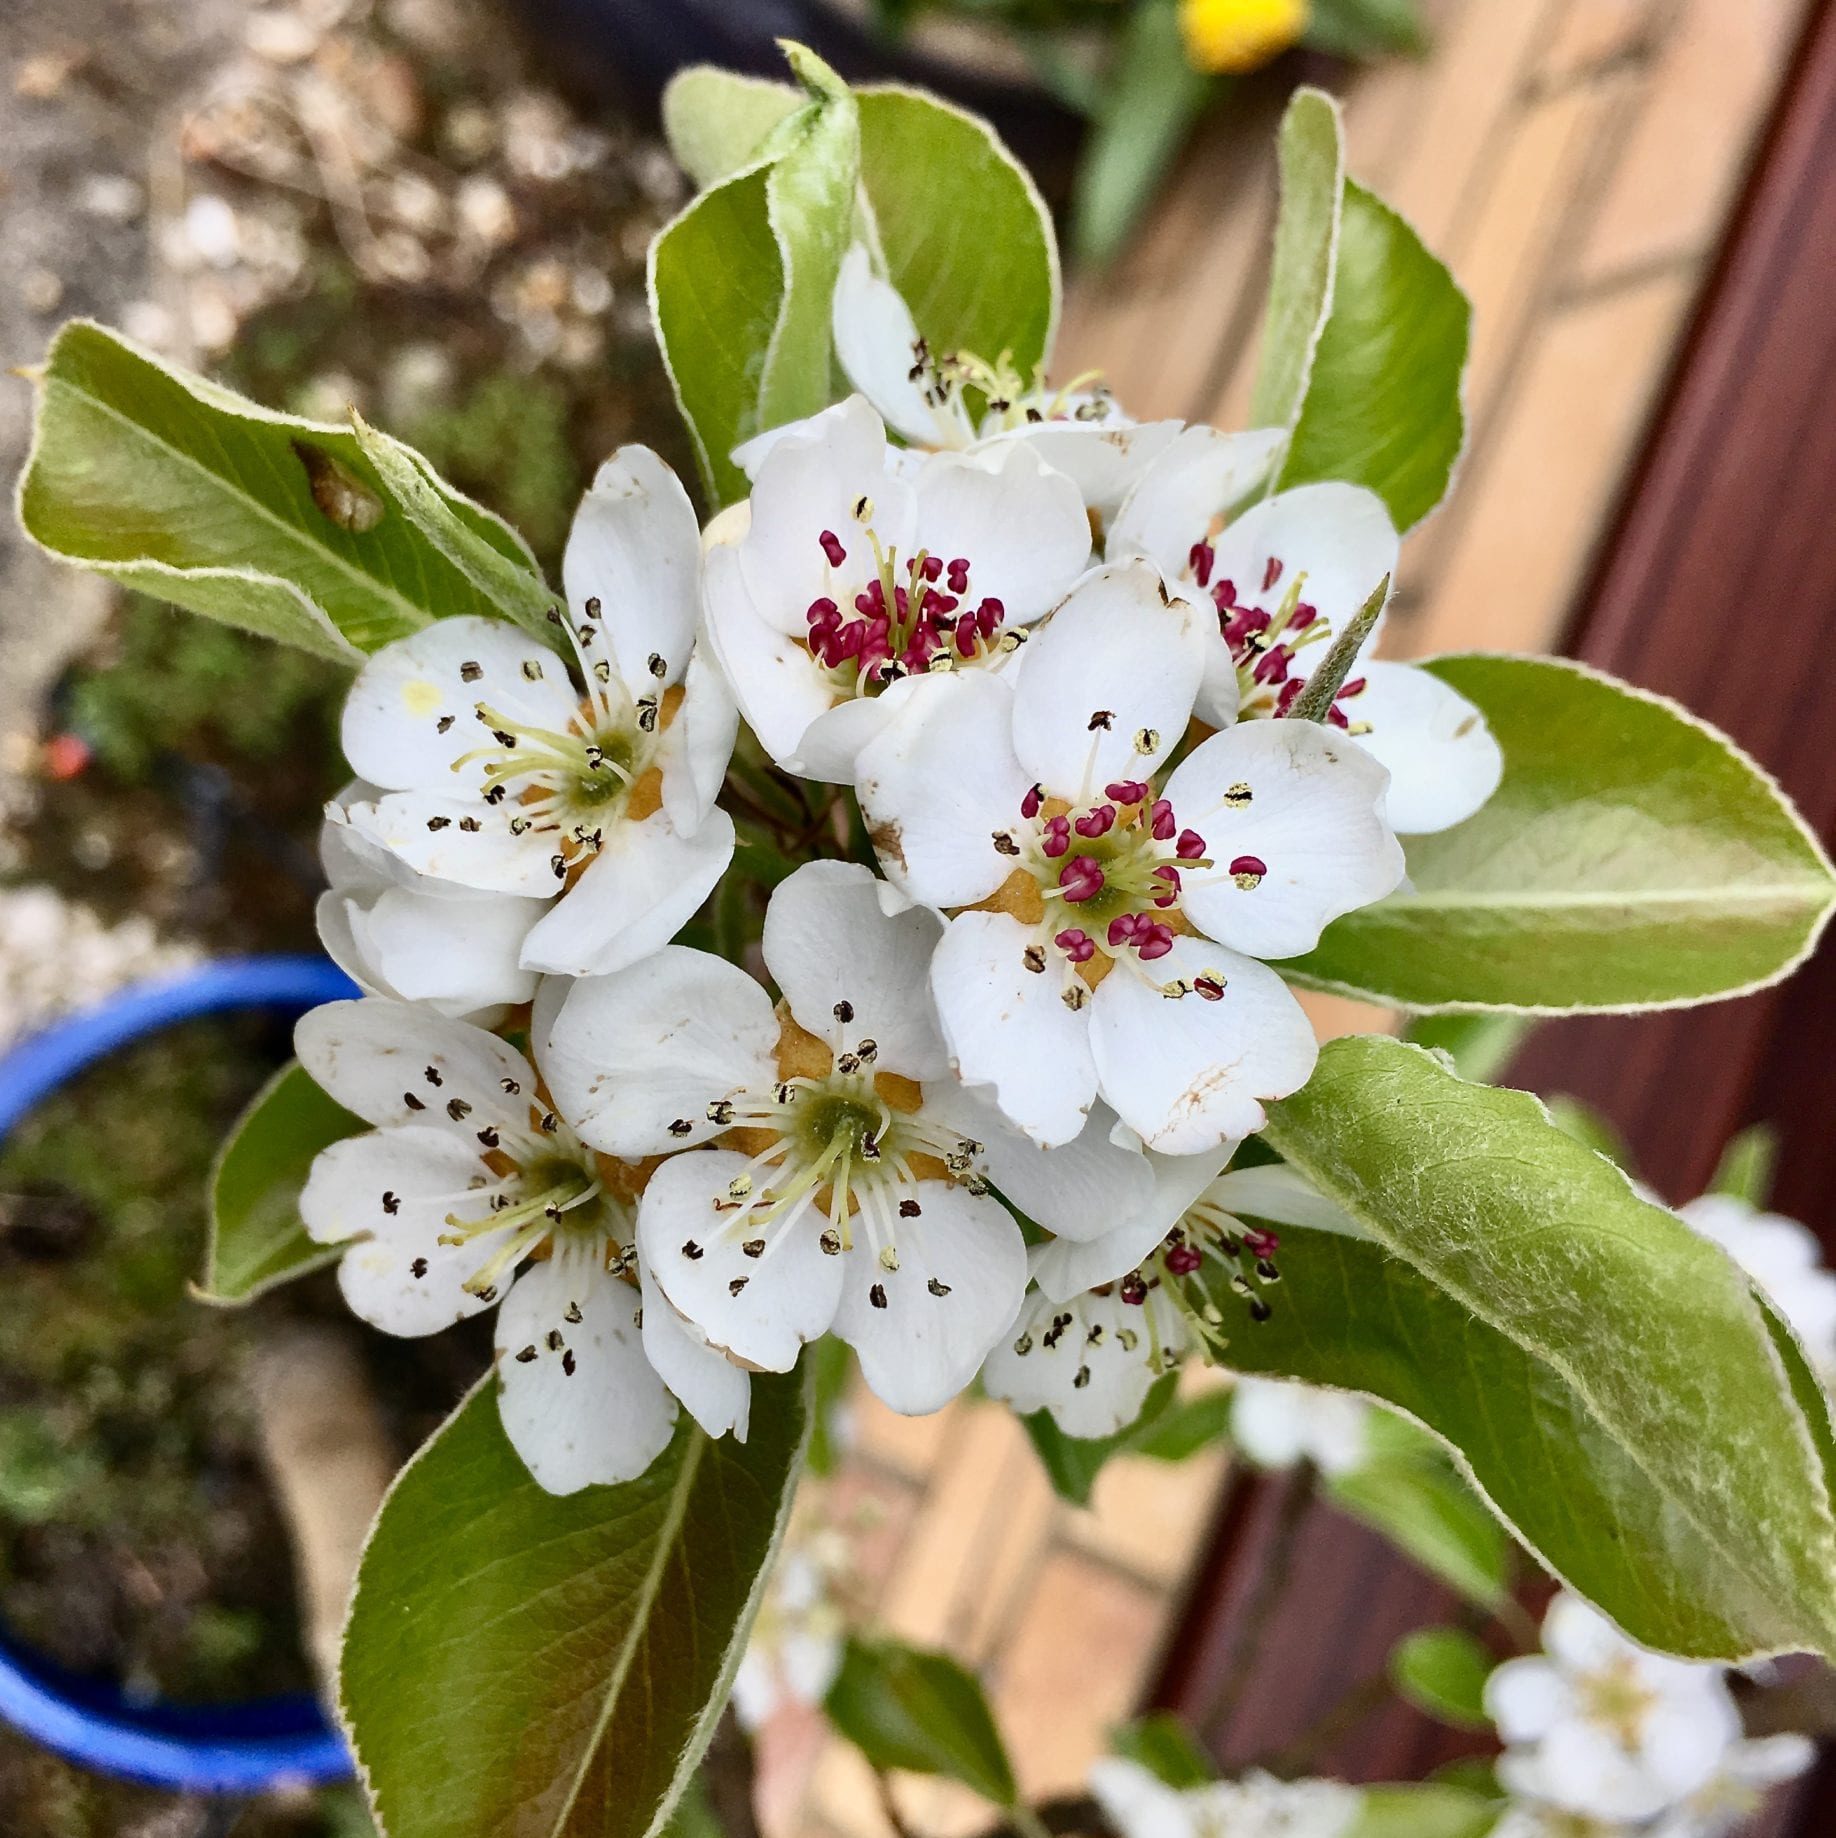 Common Pear flowers